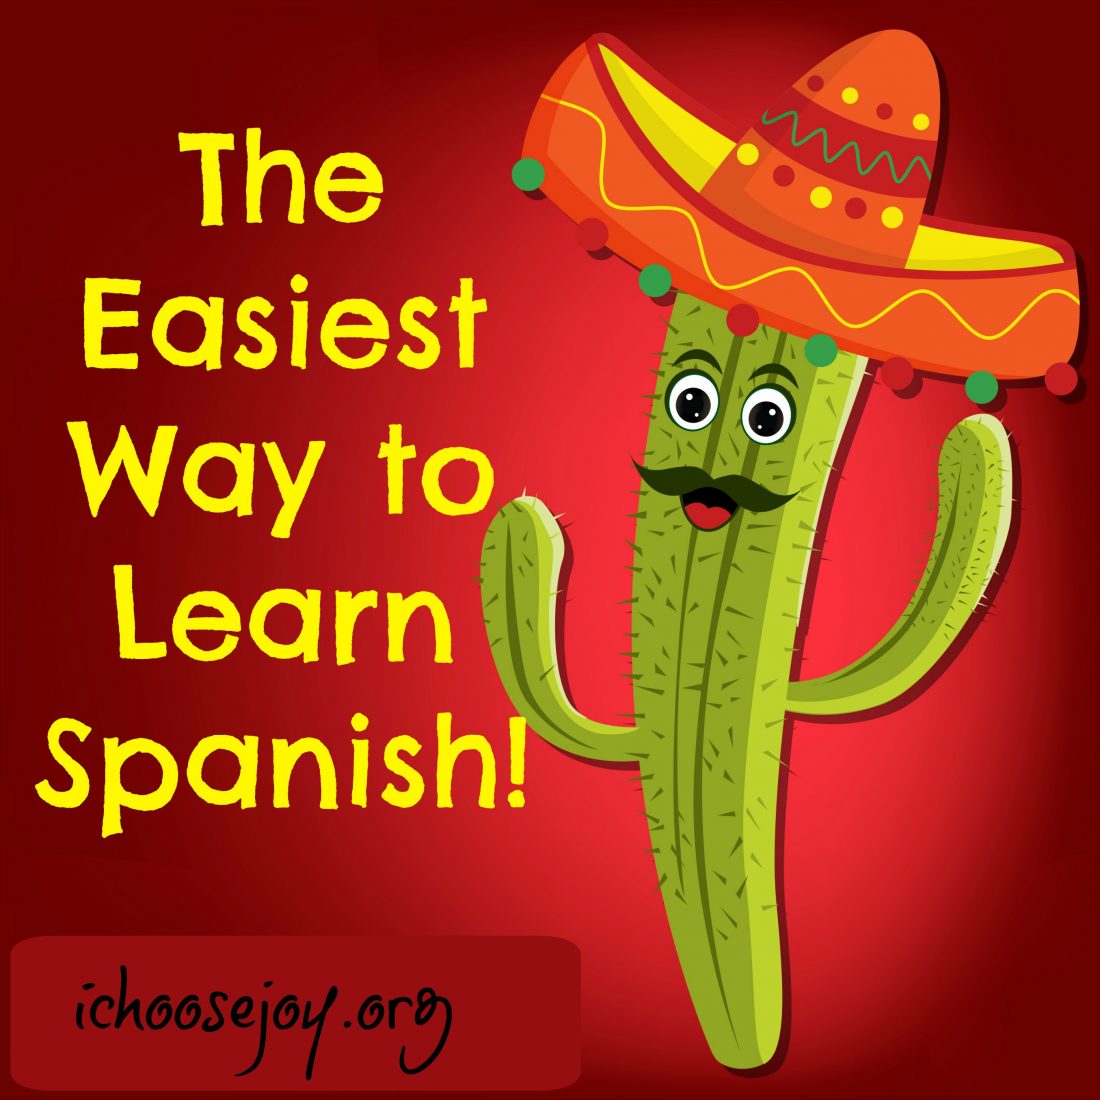 The Easiest Way to Learn Spanish!